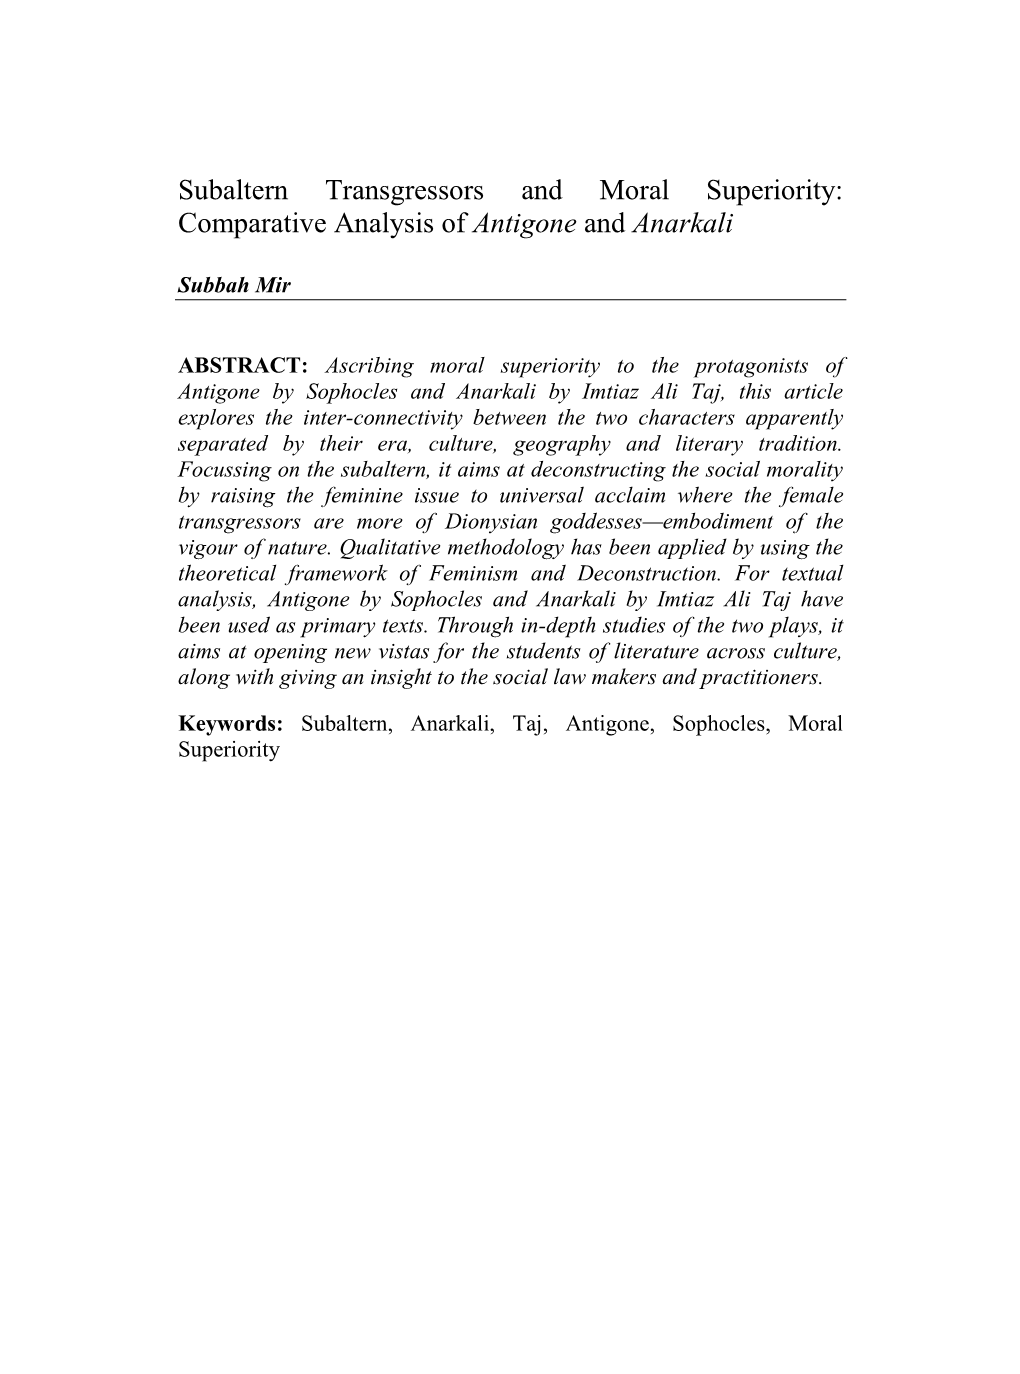 Subaltern Transgressors and Moral Superiority: Comparative Analysis of Antigone and Anarkali